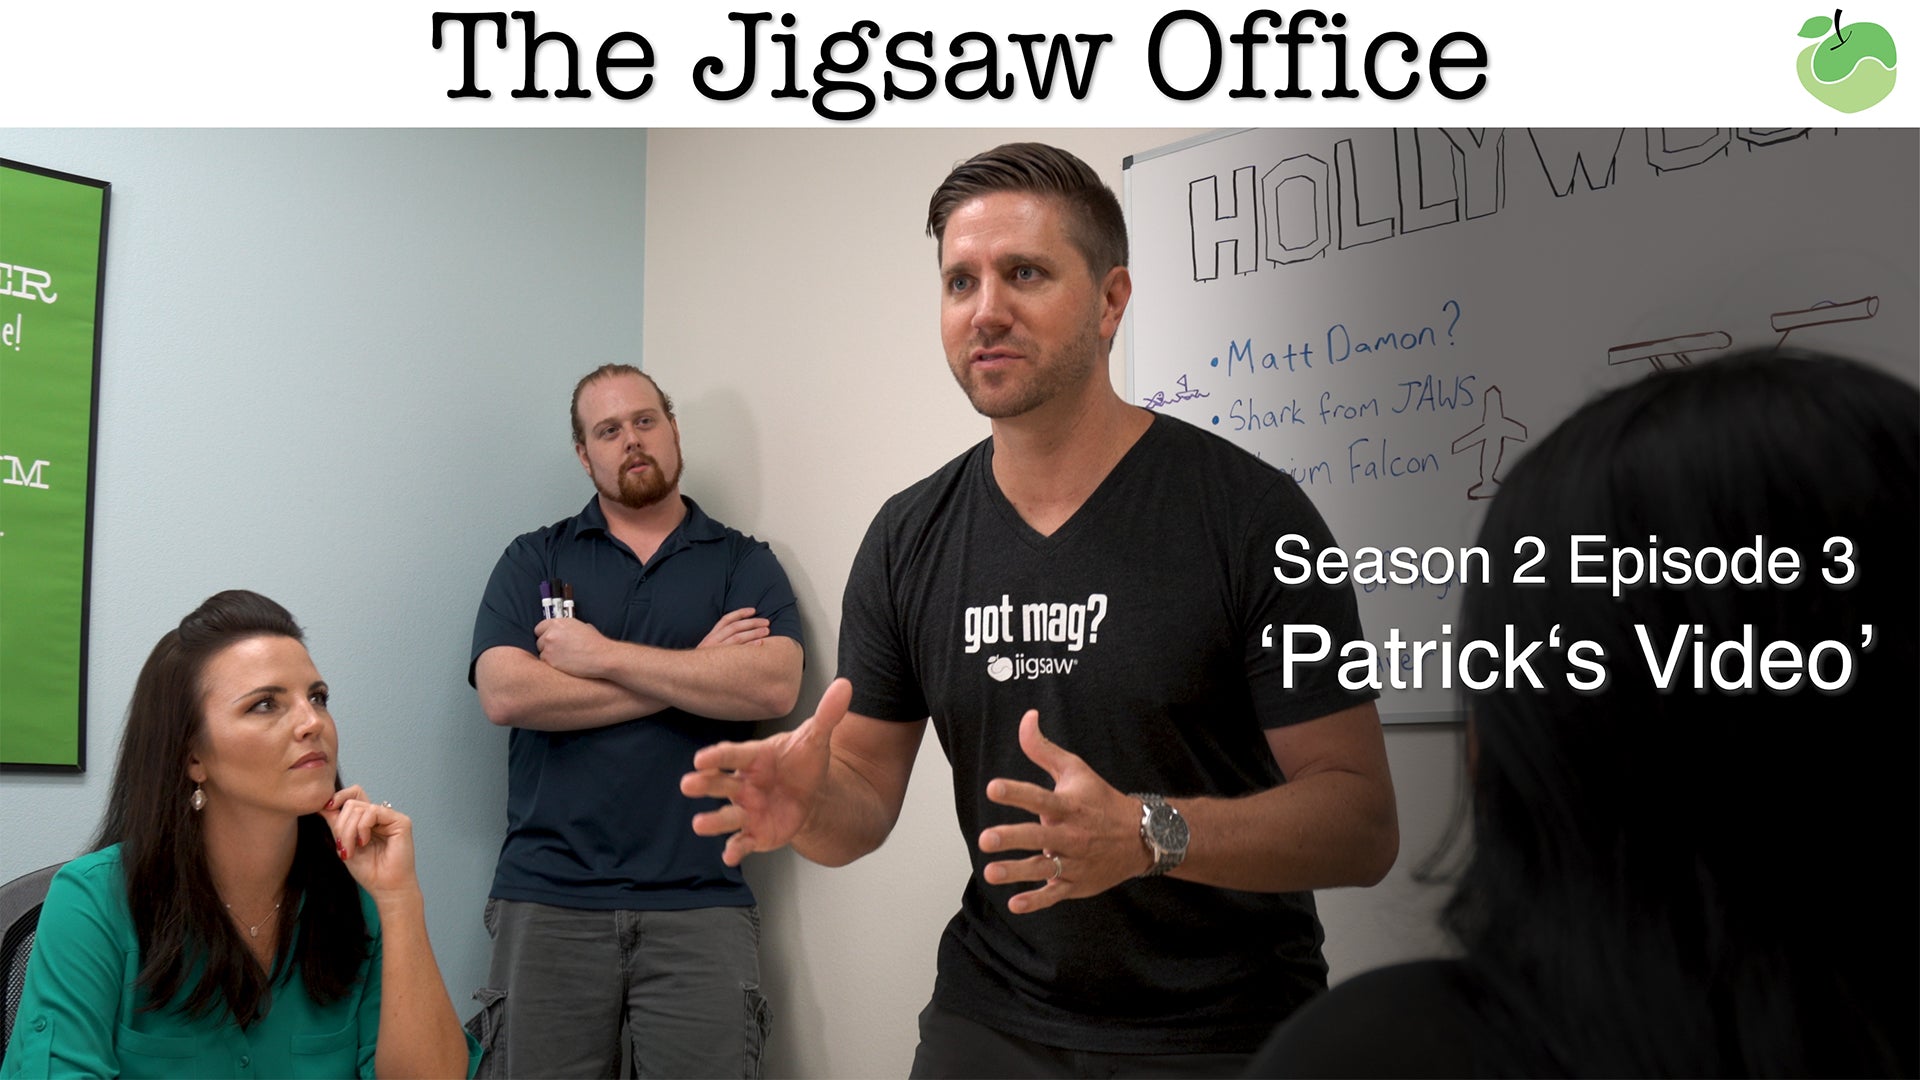 The Jigsaw Office Season 2 Episode 3: 'Patrick's Video' | #FunnyFriday